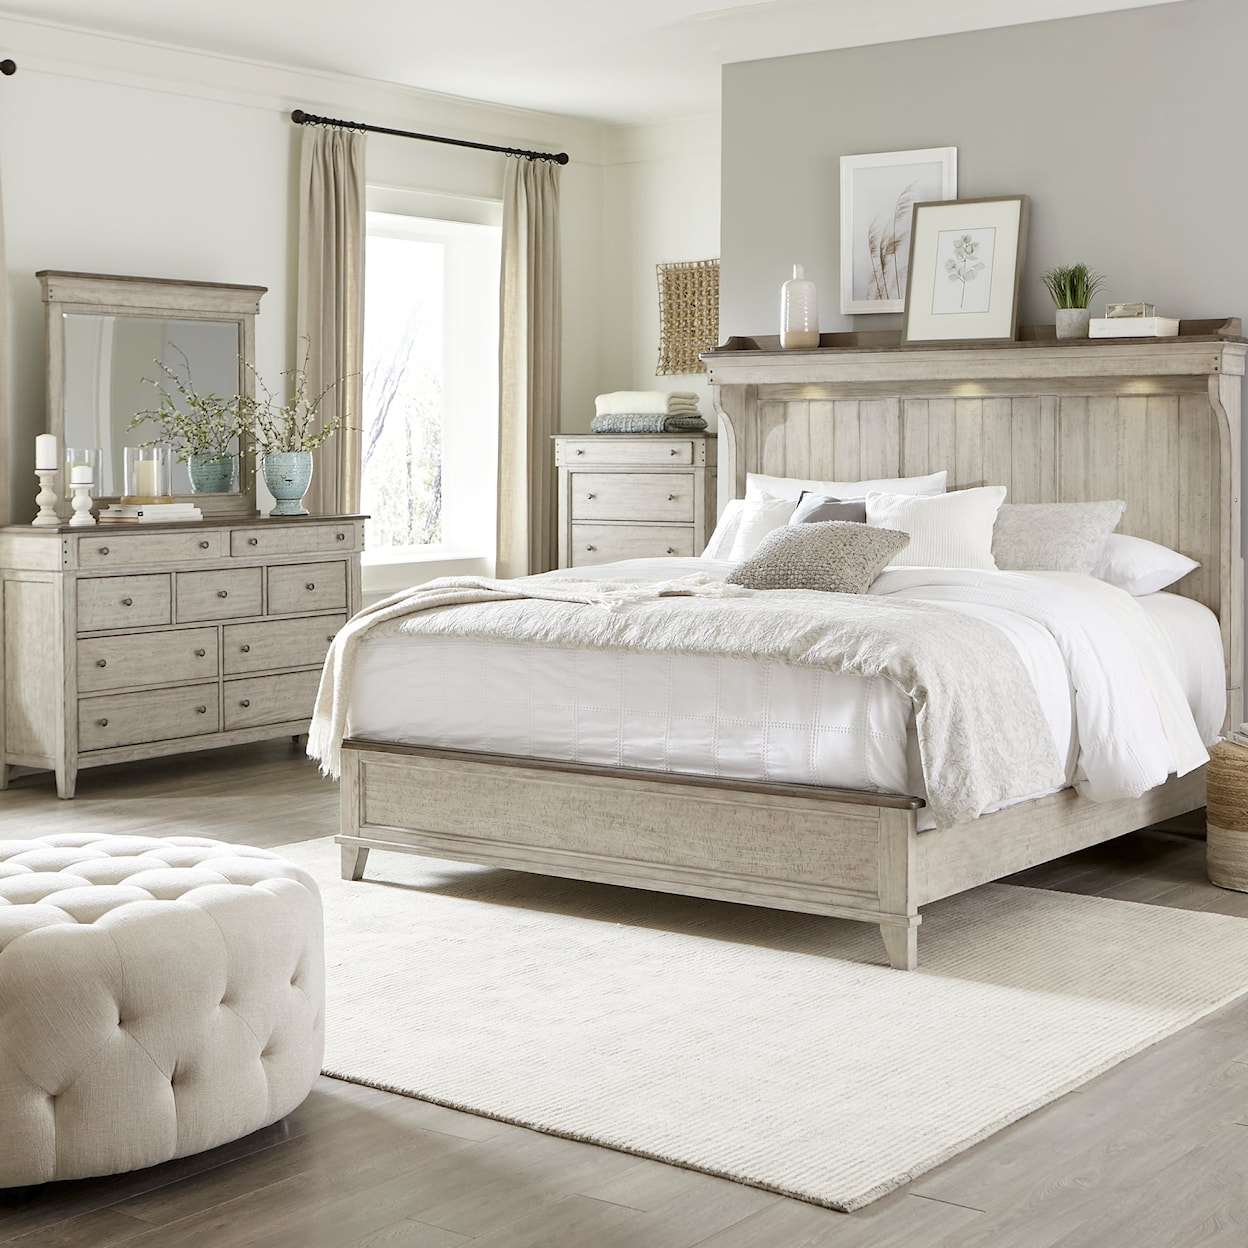 Liberty Furniture Ivy Hollow 4-Piece King Mantle Bedroom Set